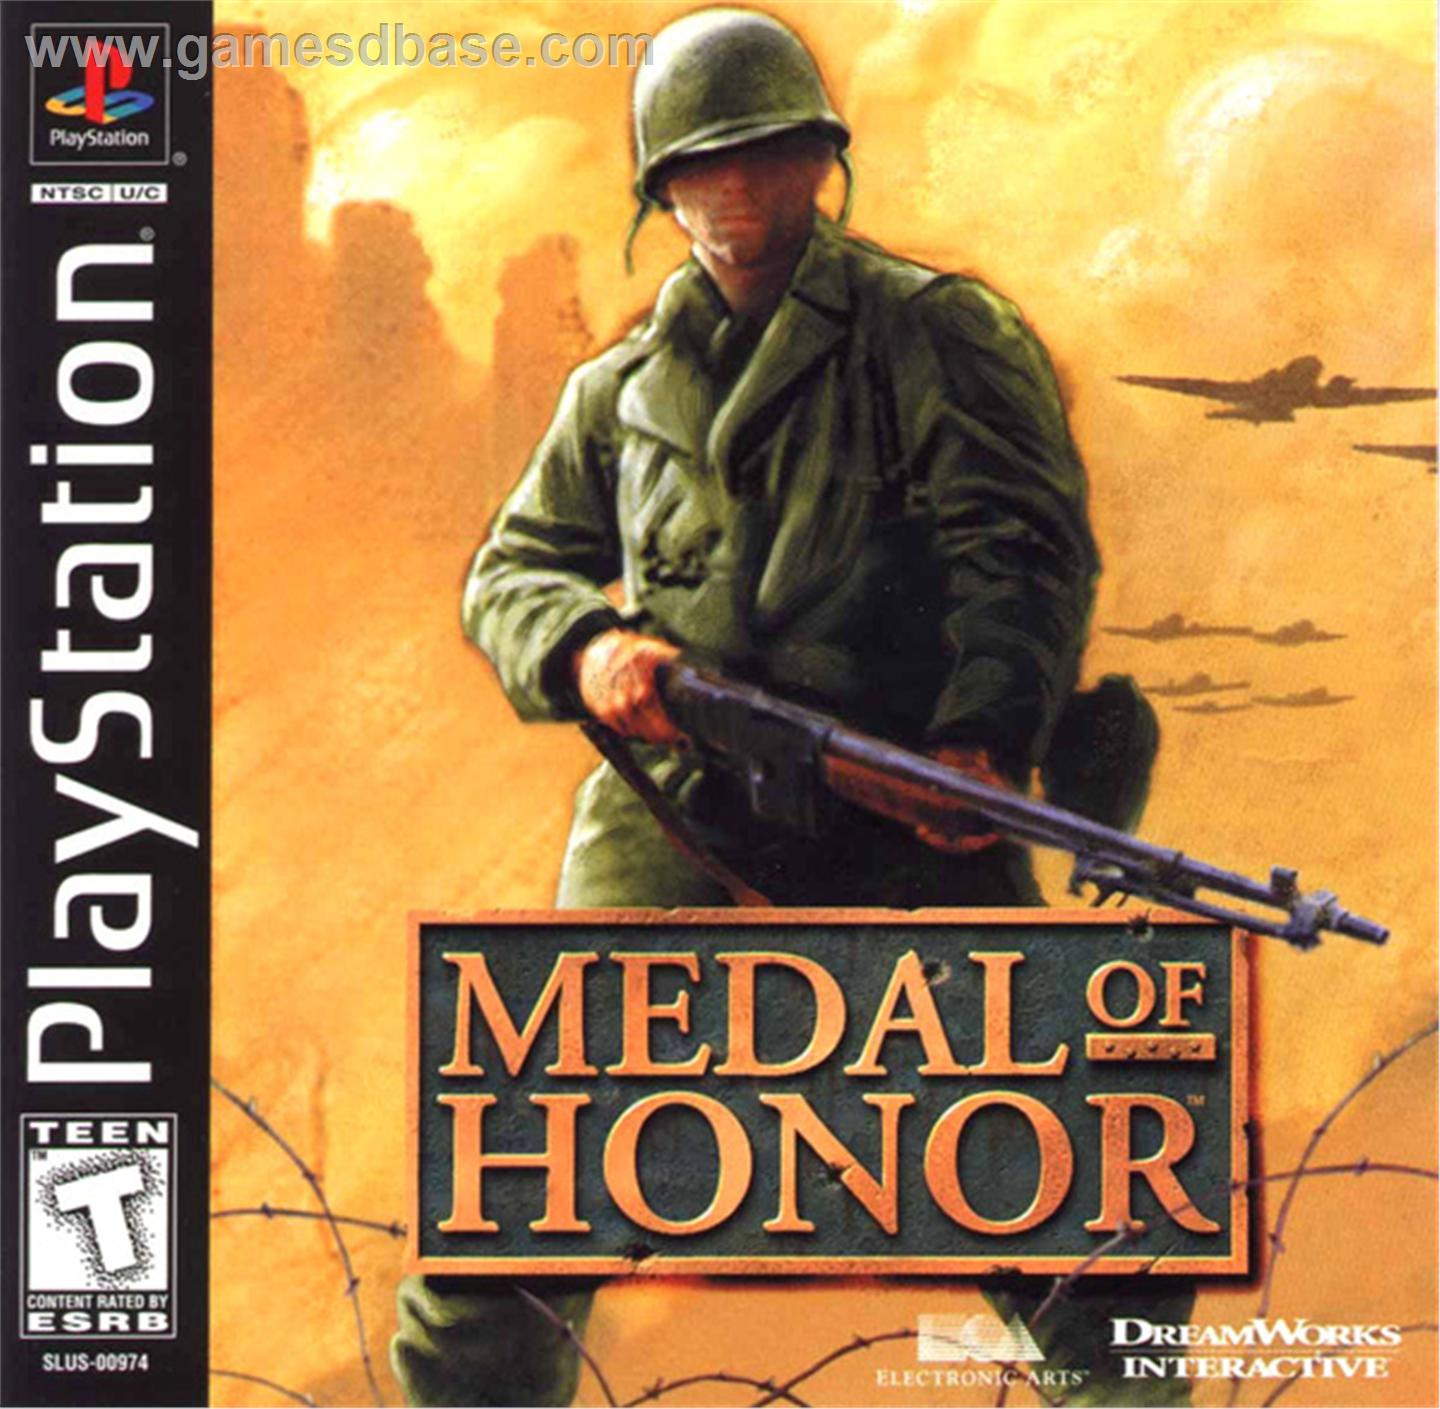 Medal_of_Honor_-_Medal_of_Honor-_Underground_-_2002_-_Electronic_Arts.jpg